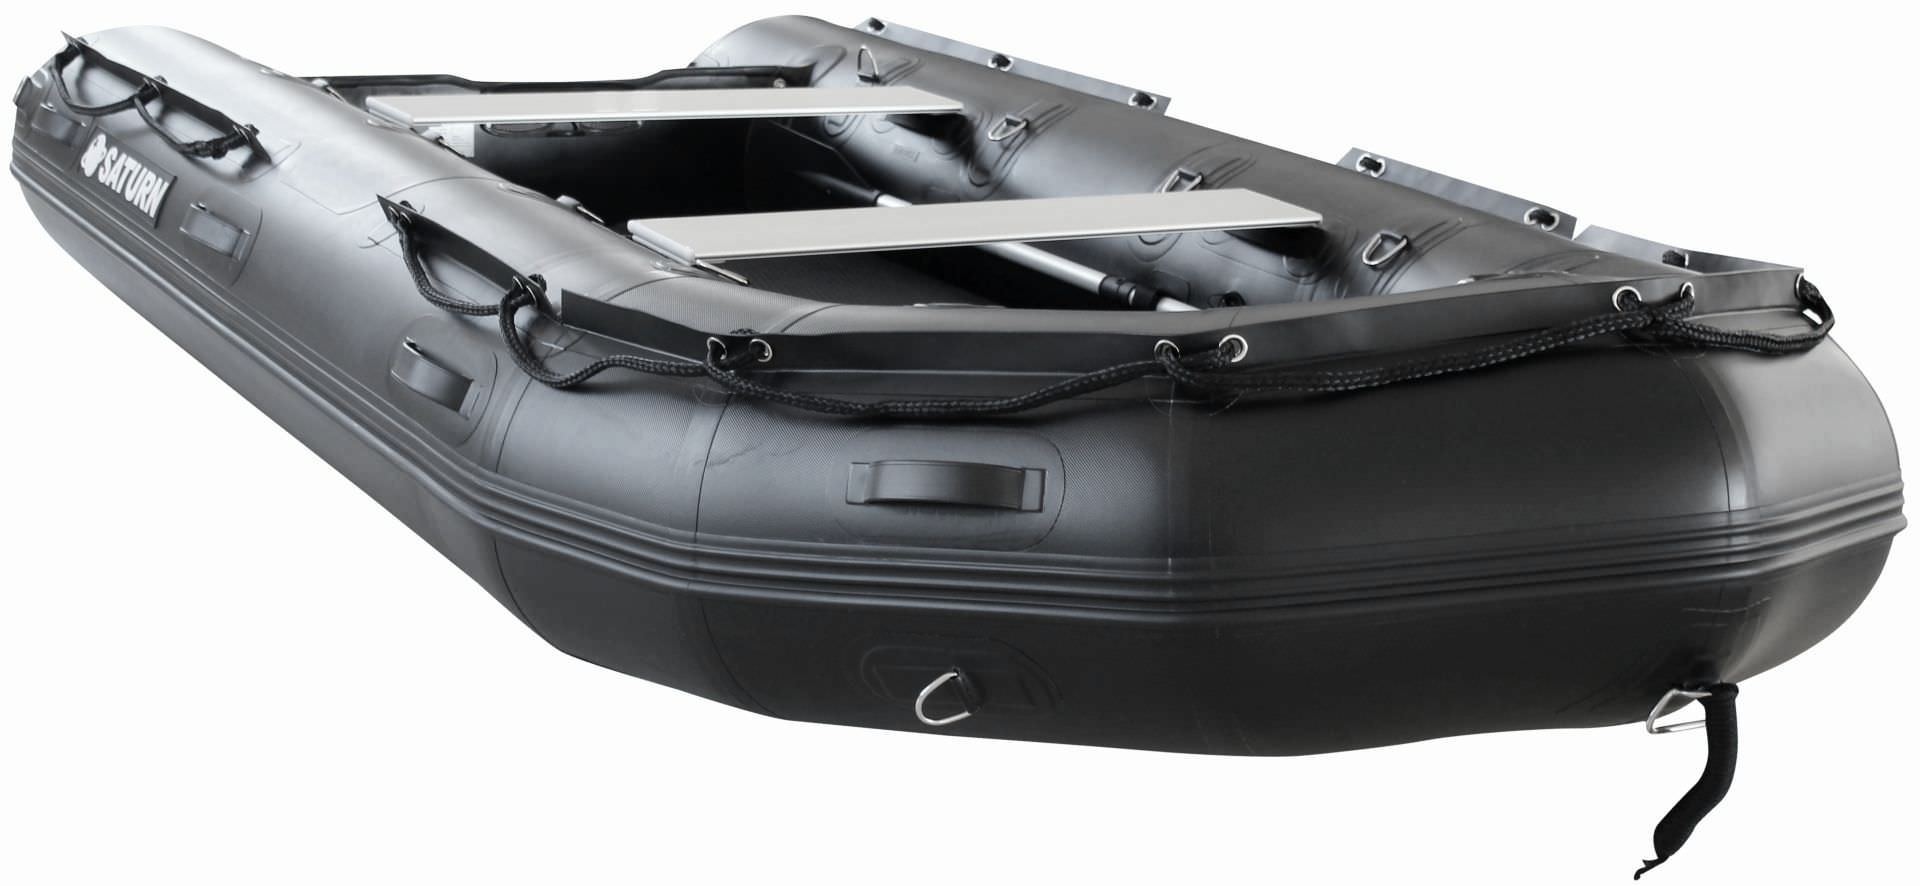 Rubrail for Inflatable Boats, Heavy Duty, sold by the foot